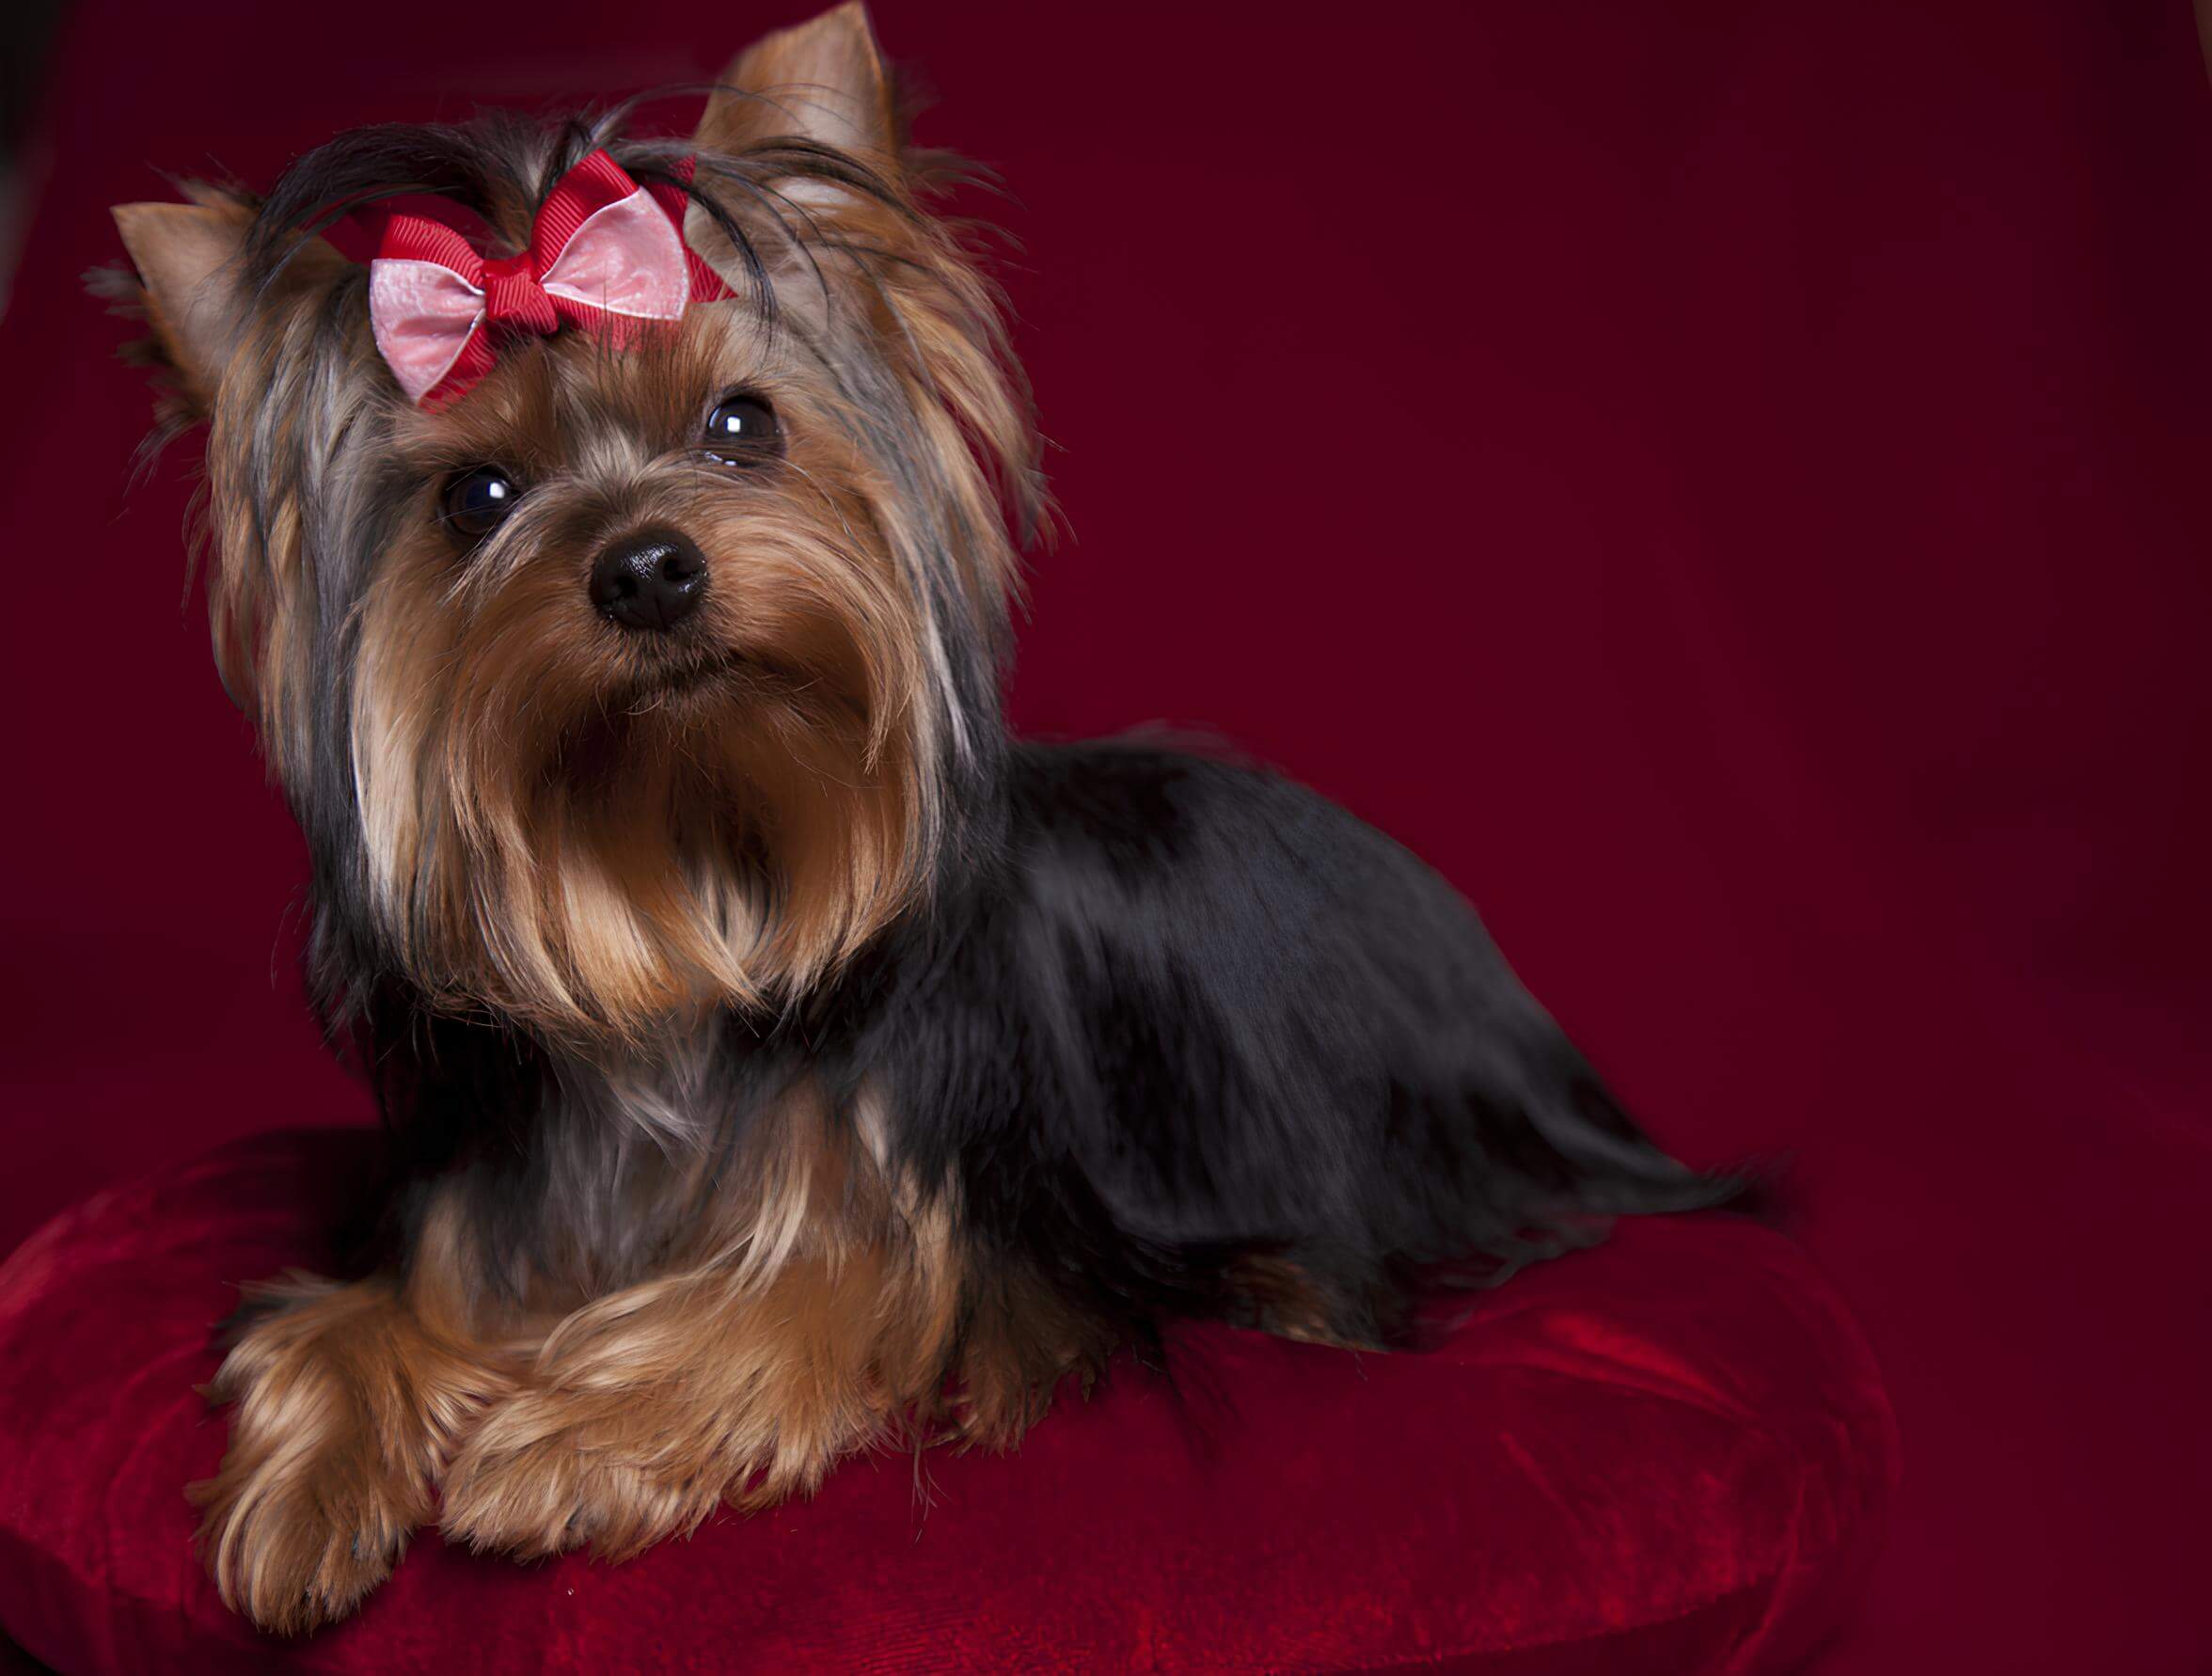 A brown and black Yorkshire terrier with a boy on her head and her front legs crossed in front of her.